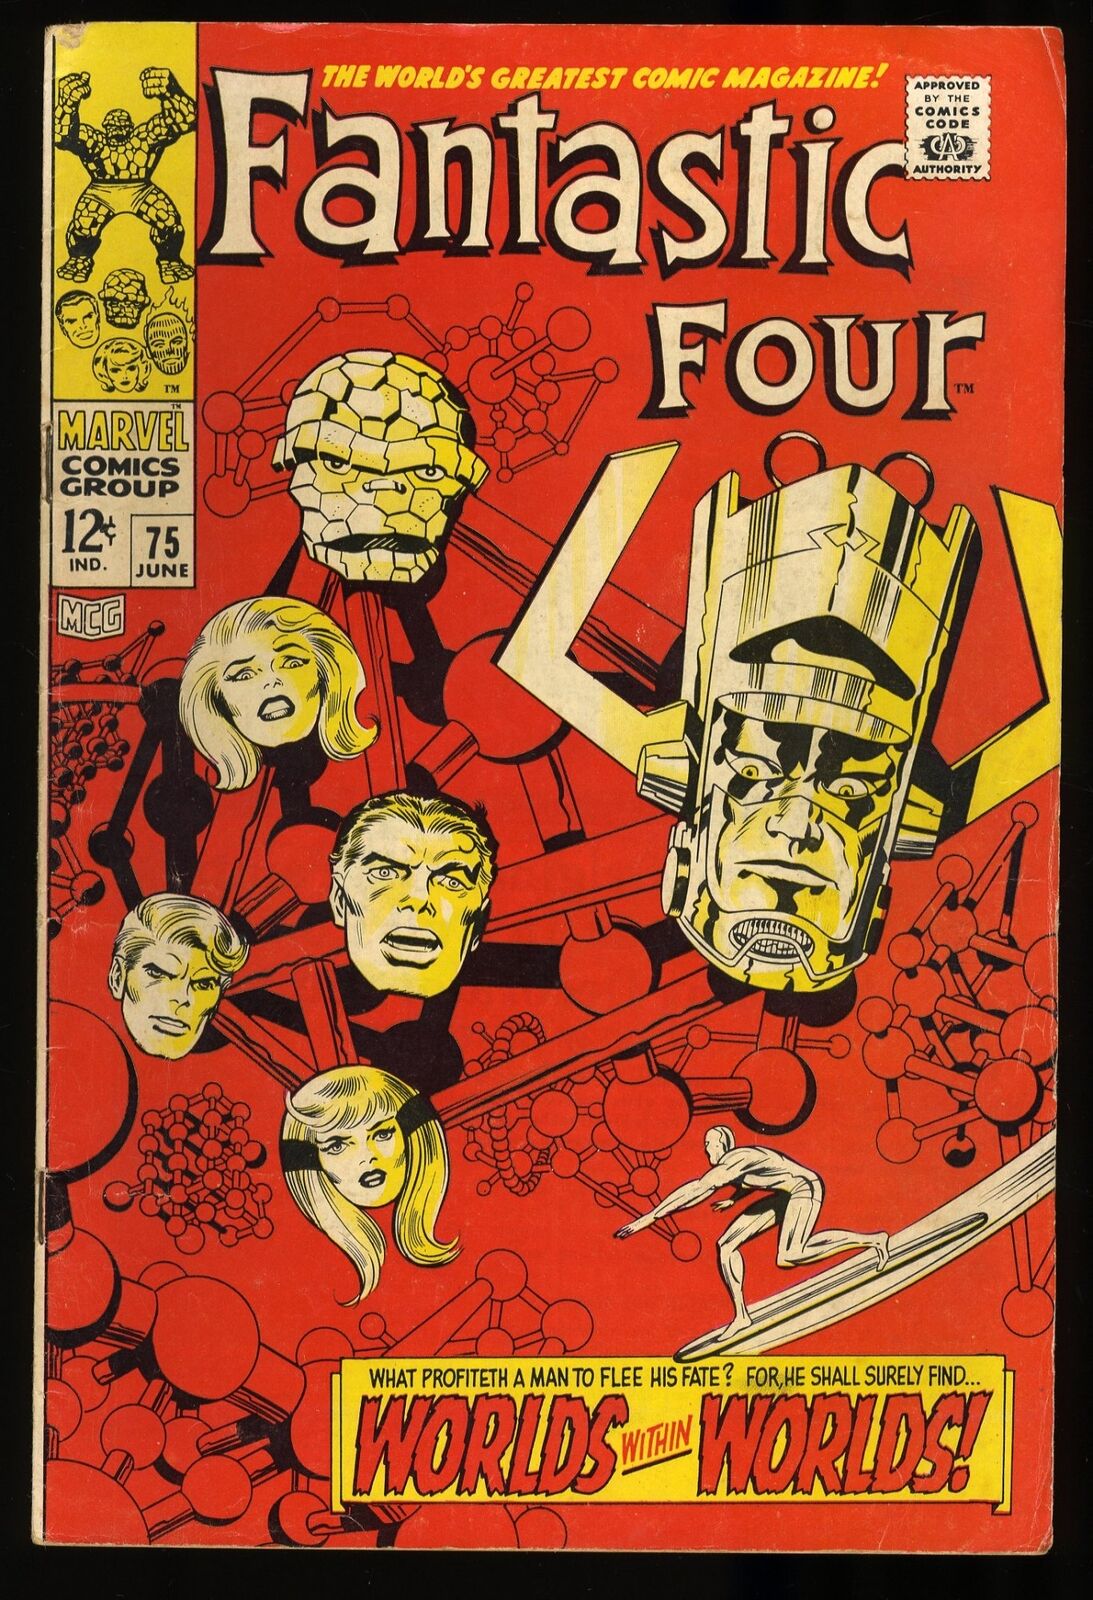 Fantastic Four #75 FN+ 6.5 Silver Surfer Galactus Jack Kirby Cover Marvel 1968